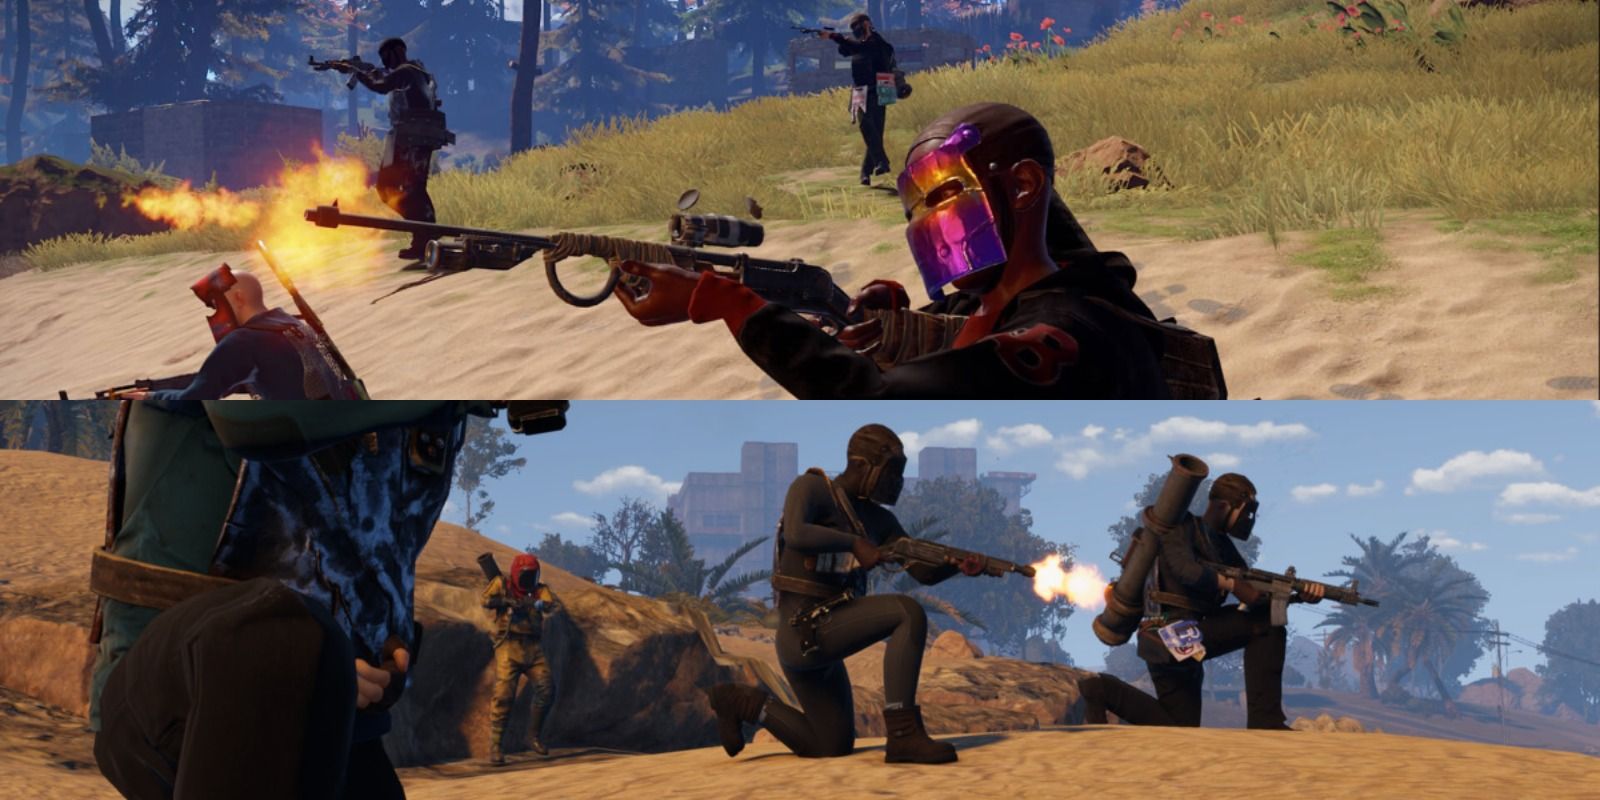 players having a shootout with armor and guns.